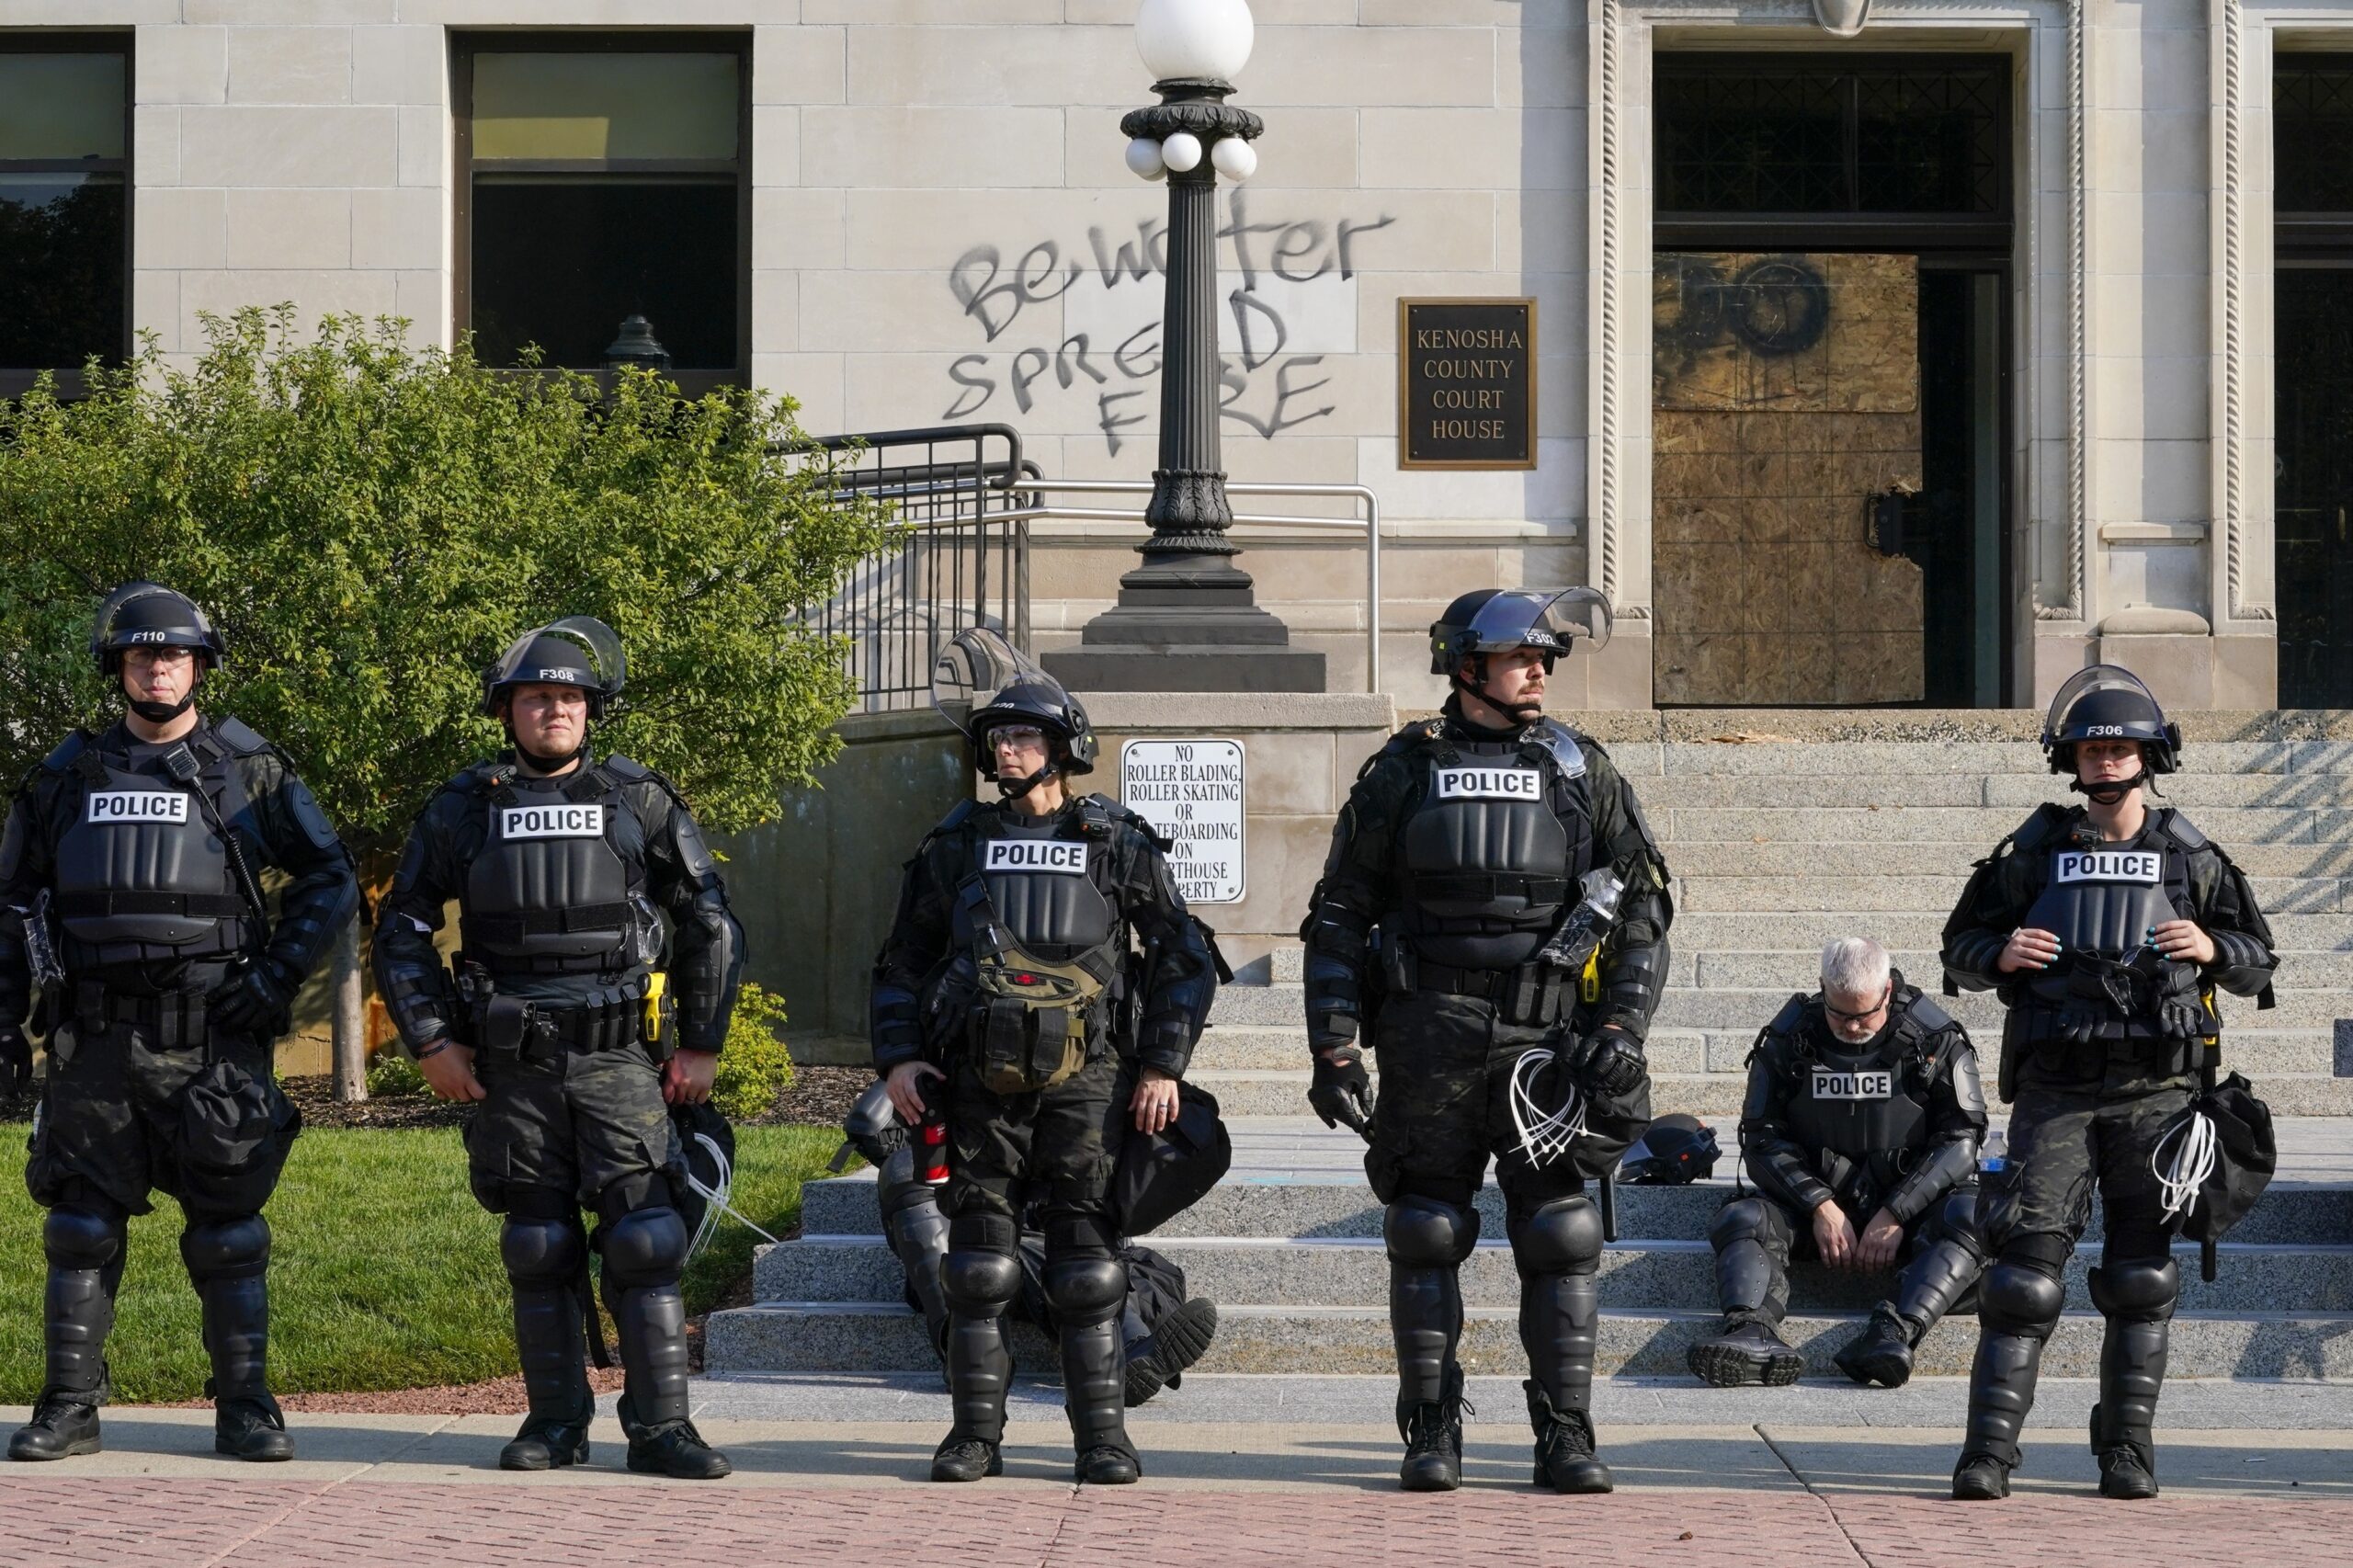 Police in riot gear stand outside the Kenosha County Court House